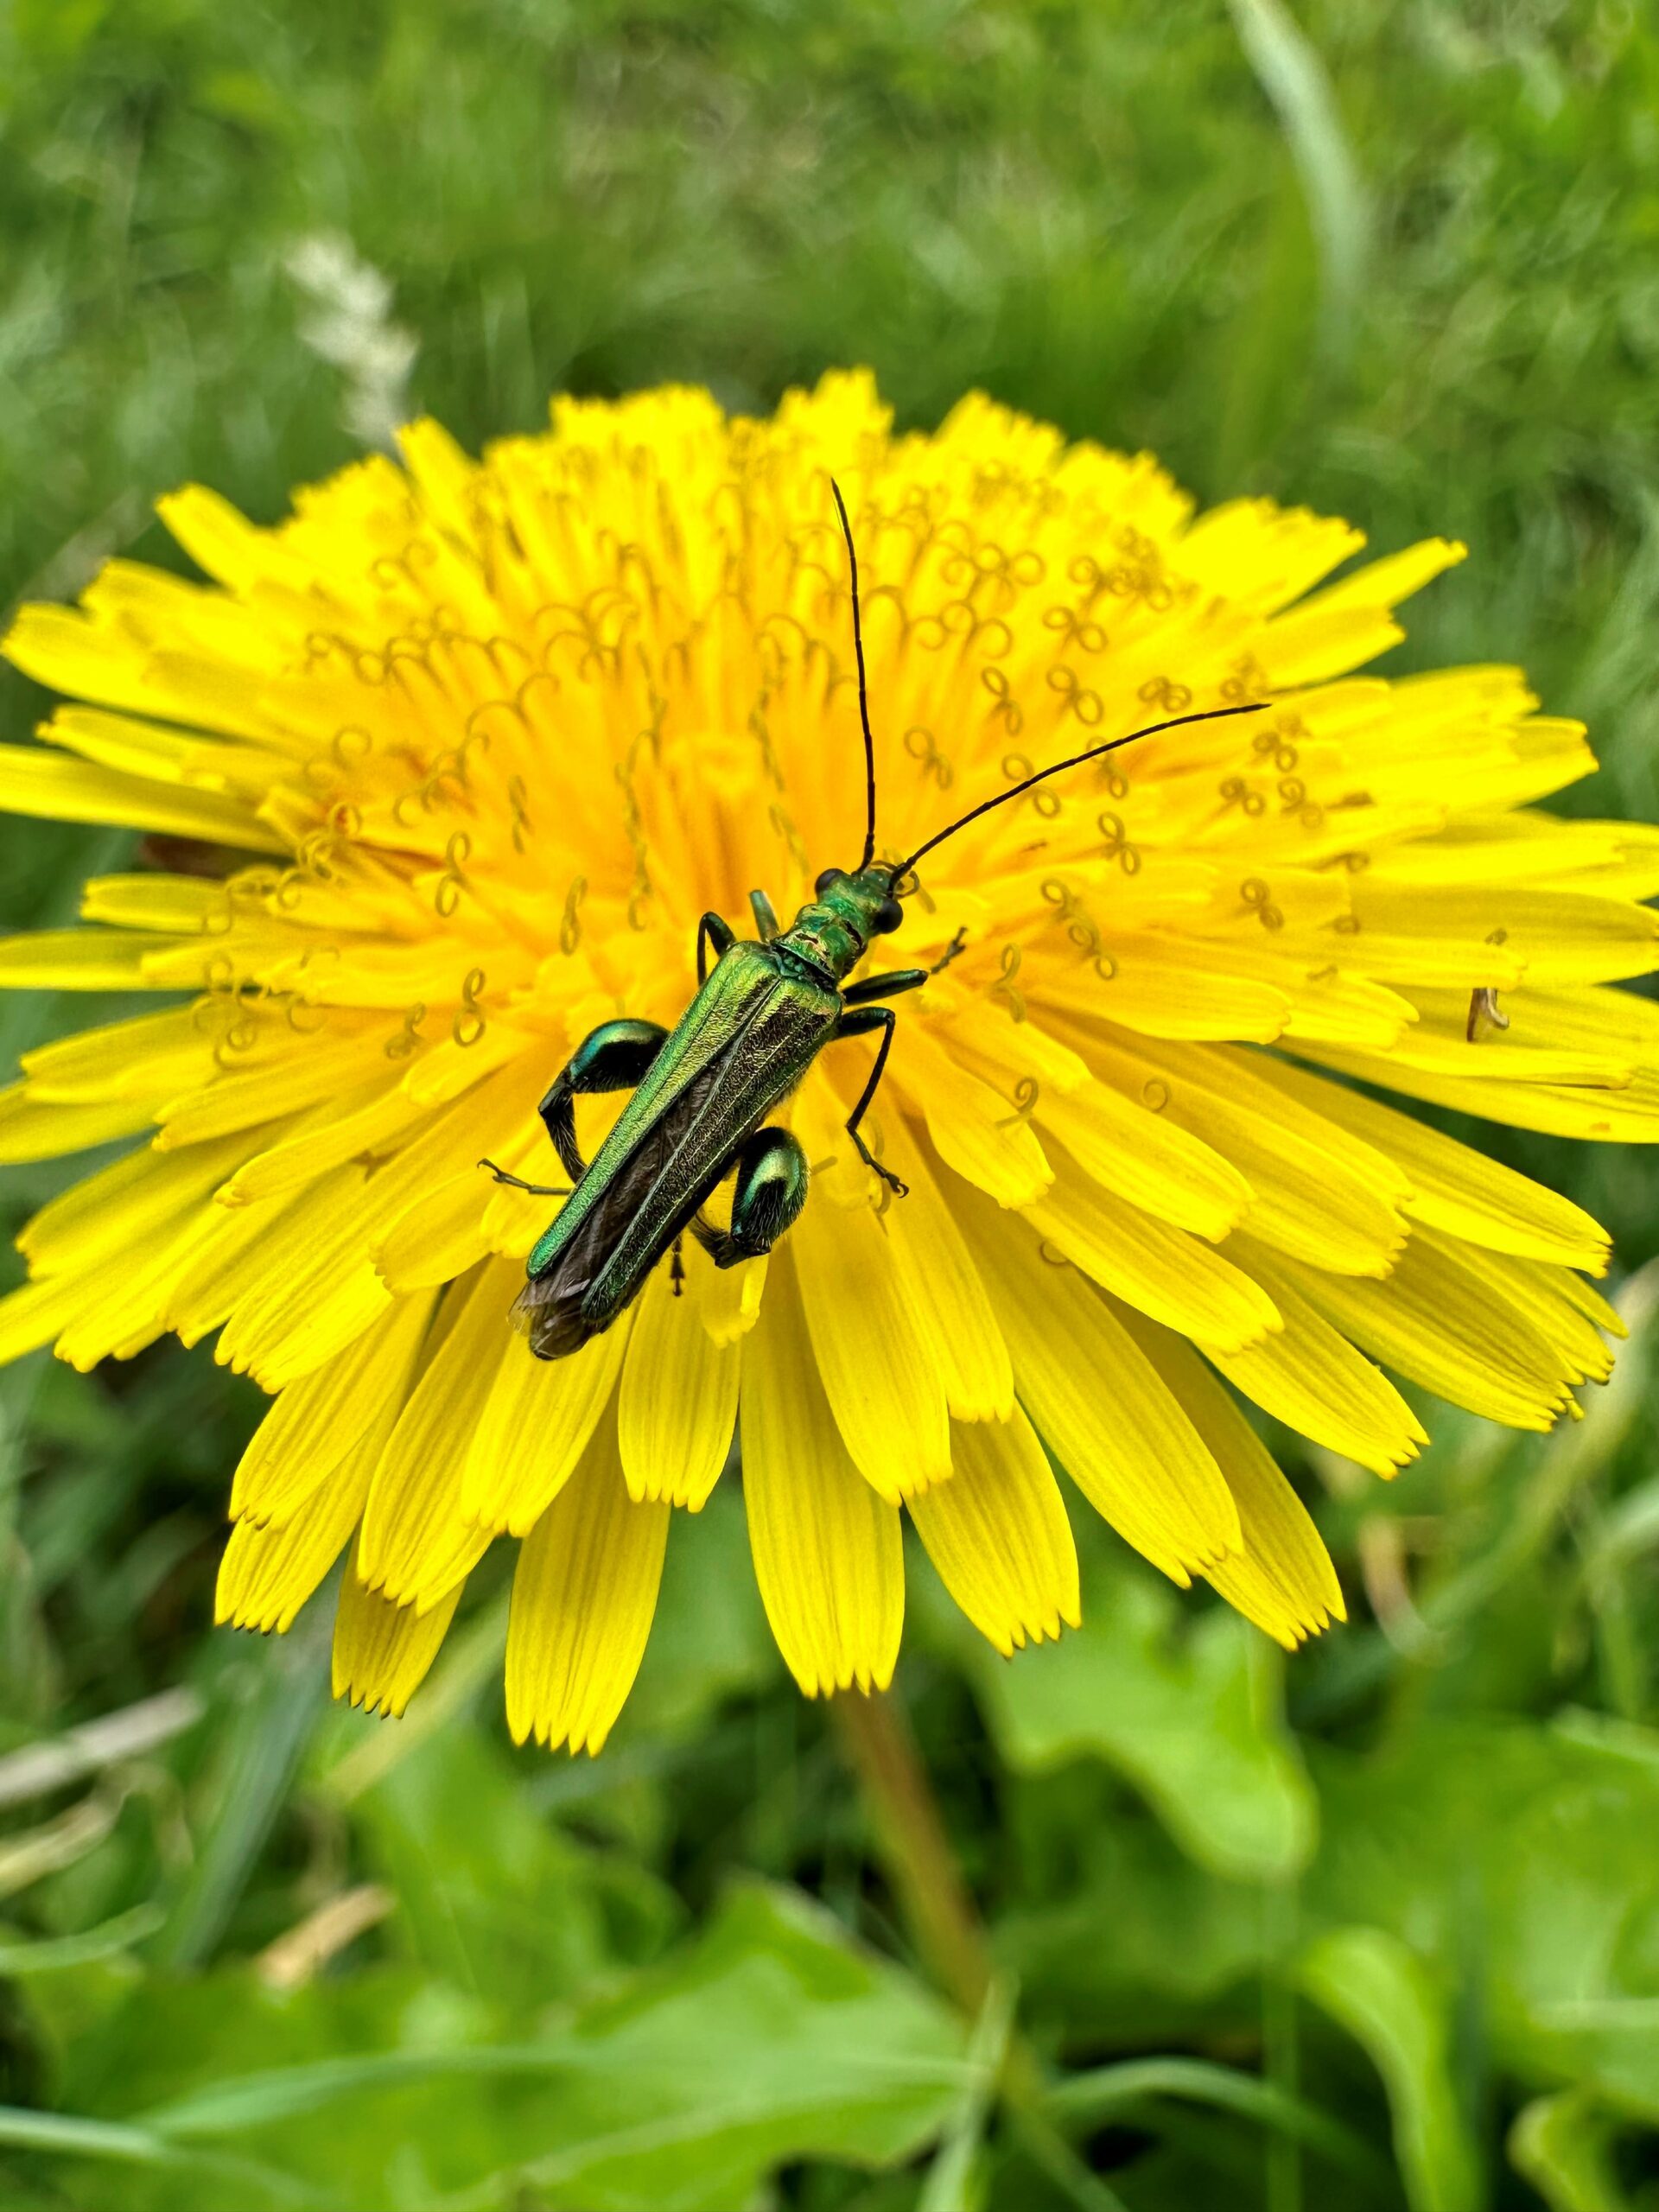 Thick Thighed Beetle